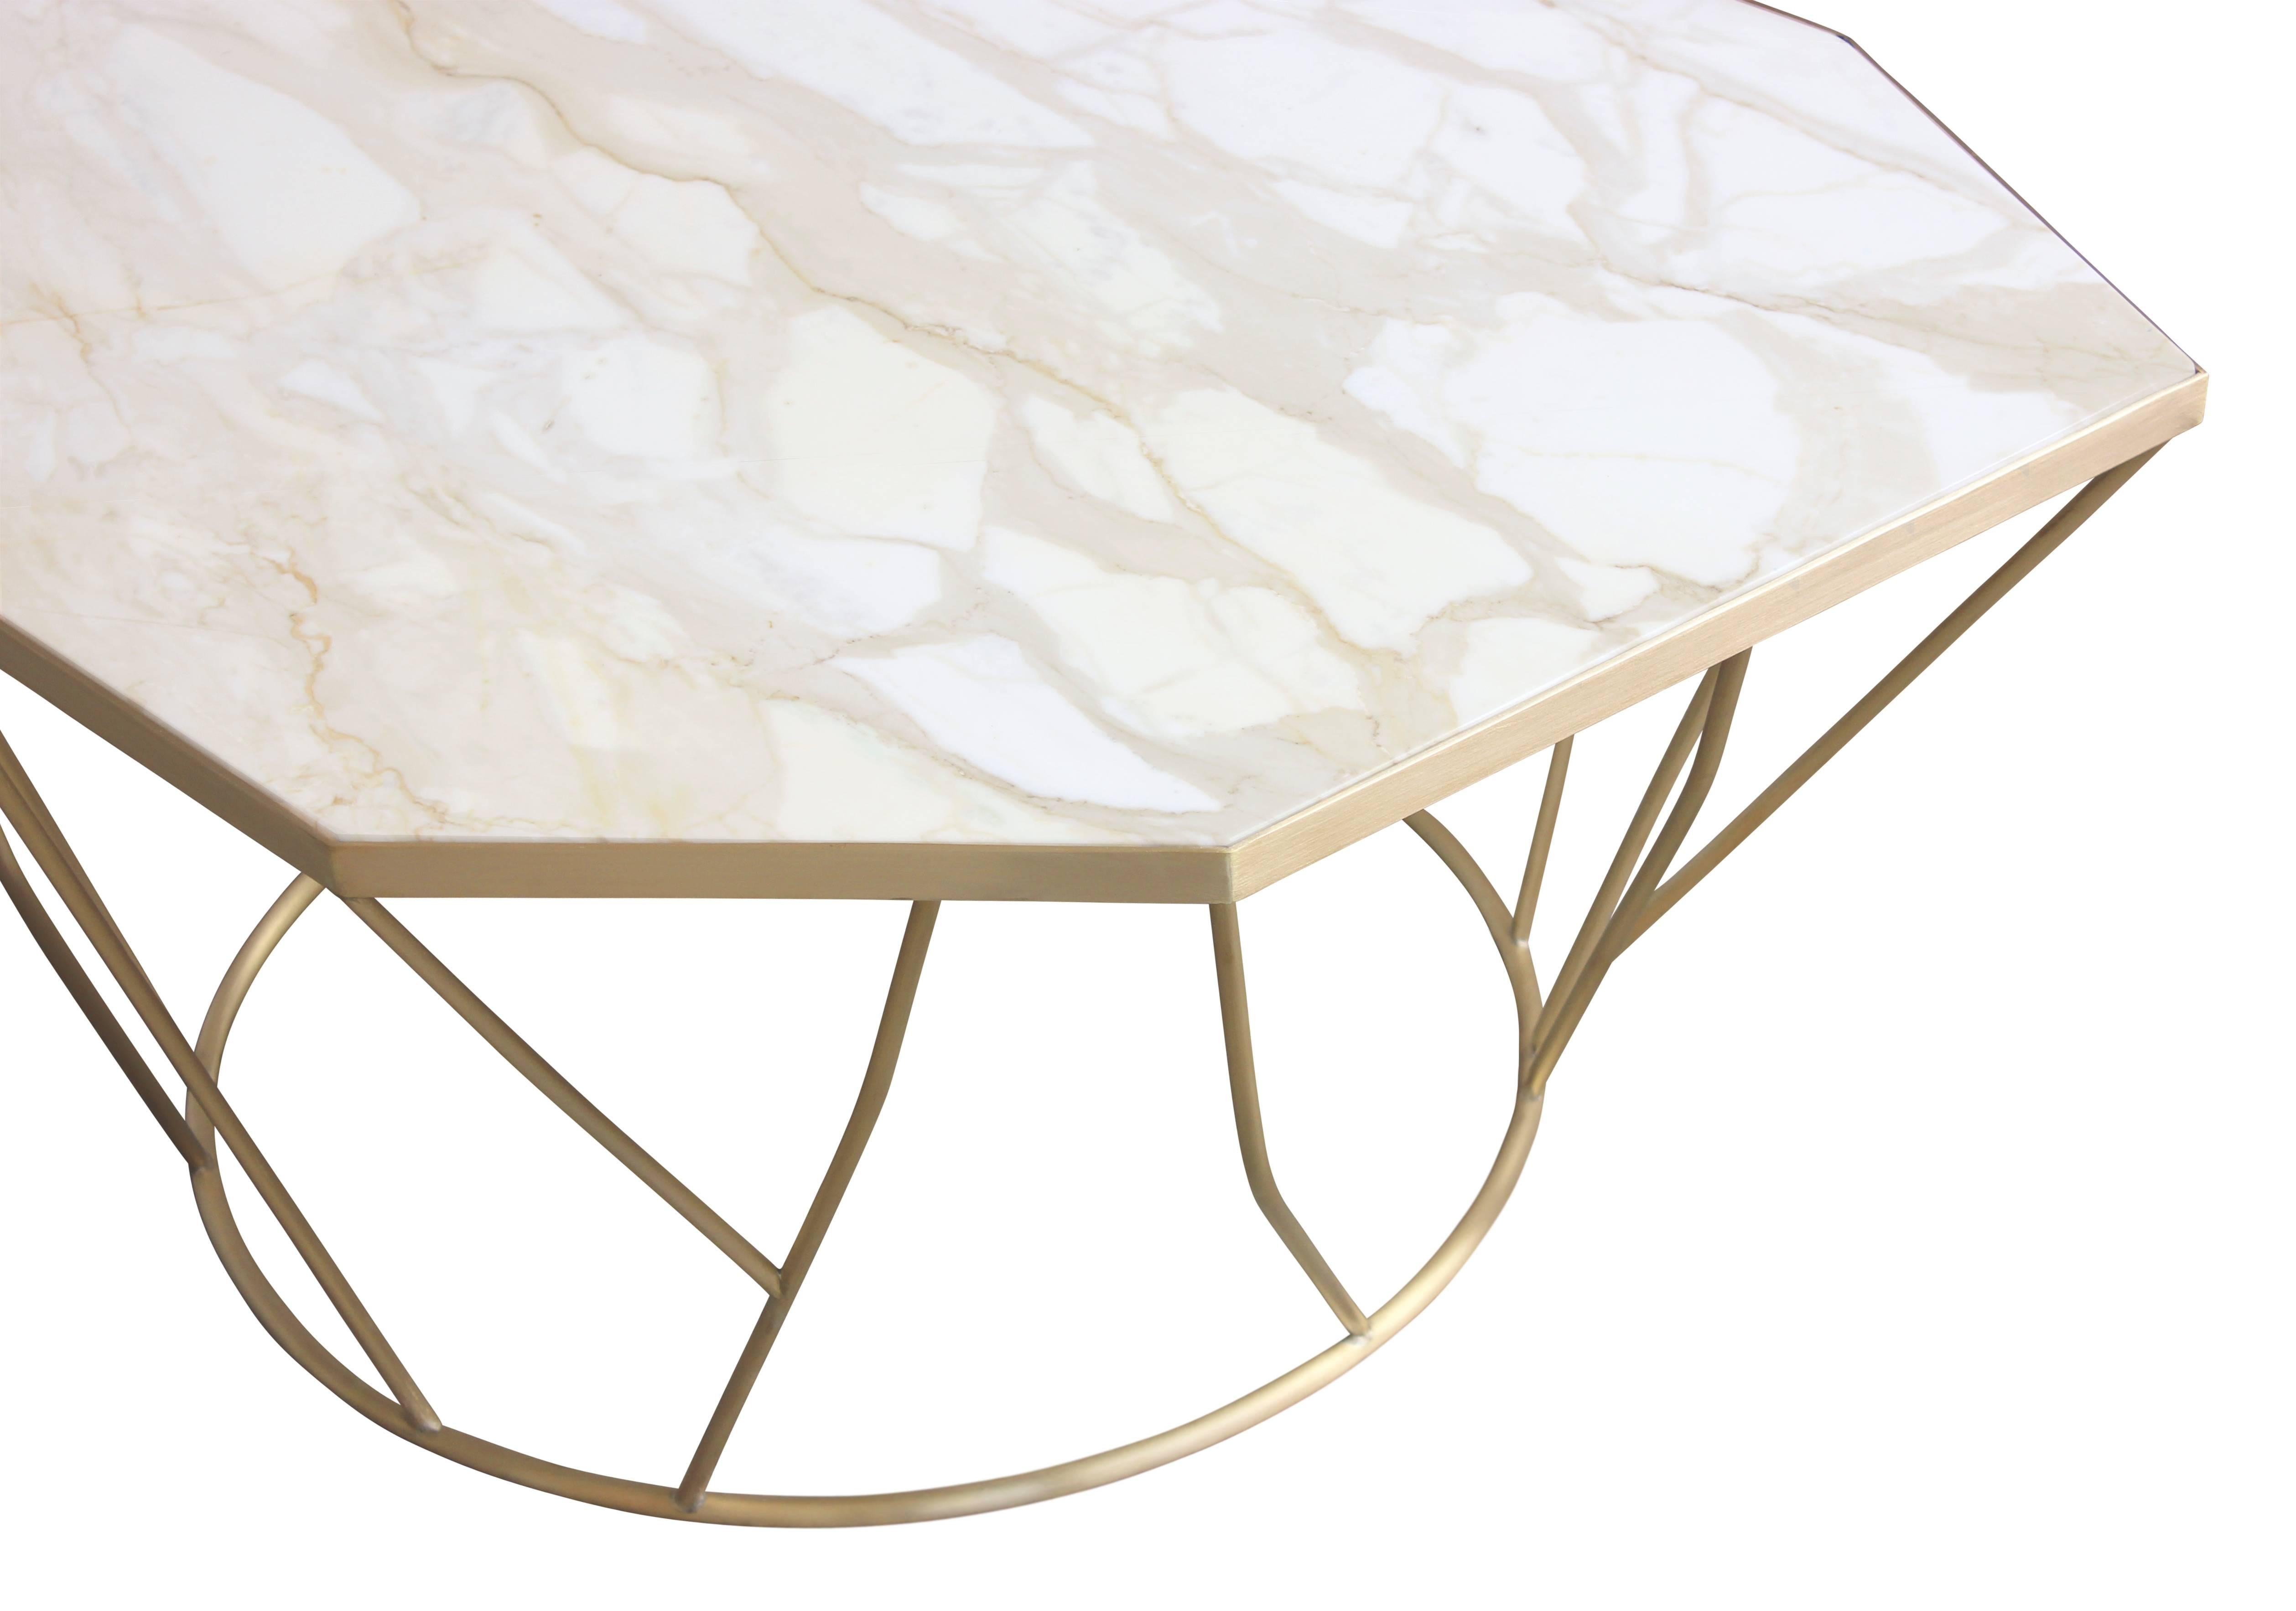 James Devlin Studio’s Facet Cocktail Table is a beautiful and sculptural piece comprising a custom shaped marble slab inlaid into a bronze frame atop a hand welded sculptural base. It presents a visually lightweight yet complex and stimulating